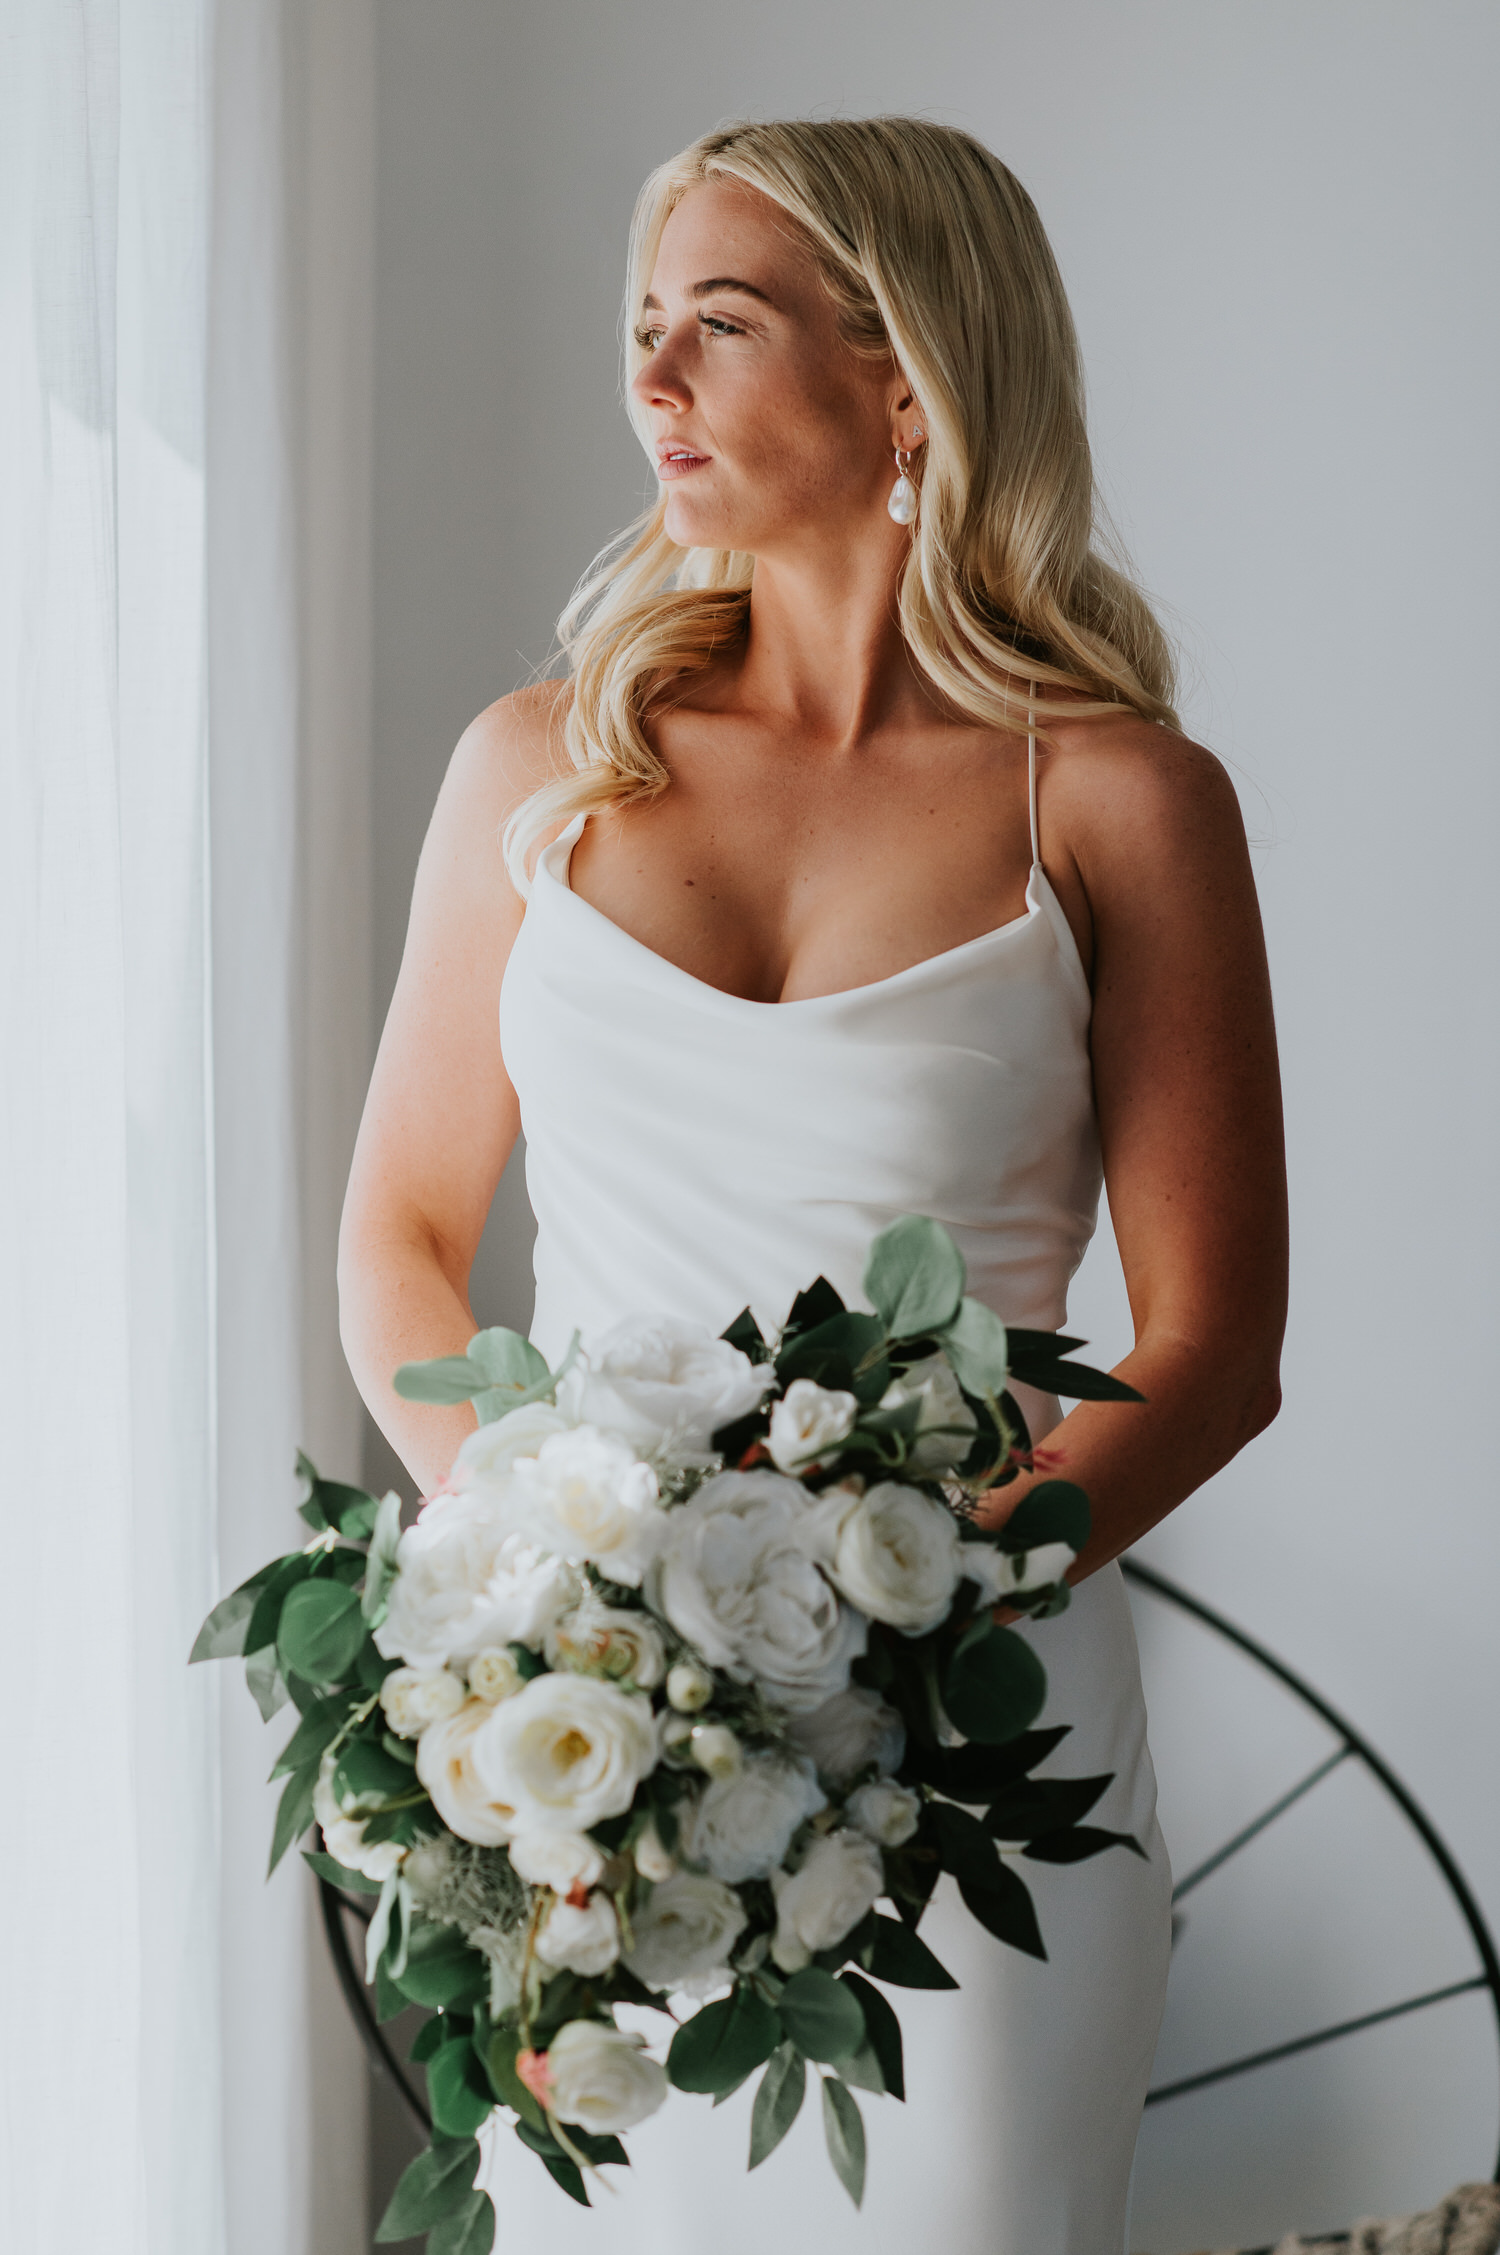 Mykonos wedding photographer: stunning bride looking out through the window holding her bouquet in beautiful light.